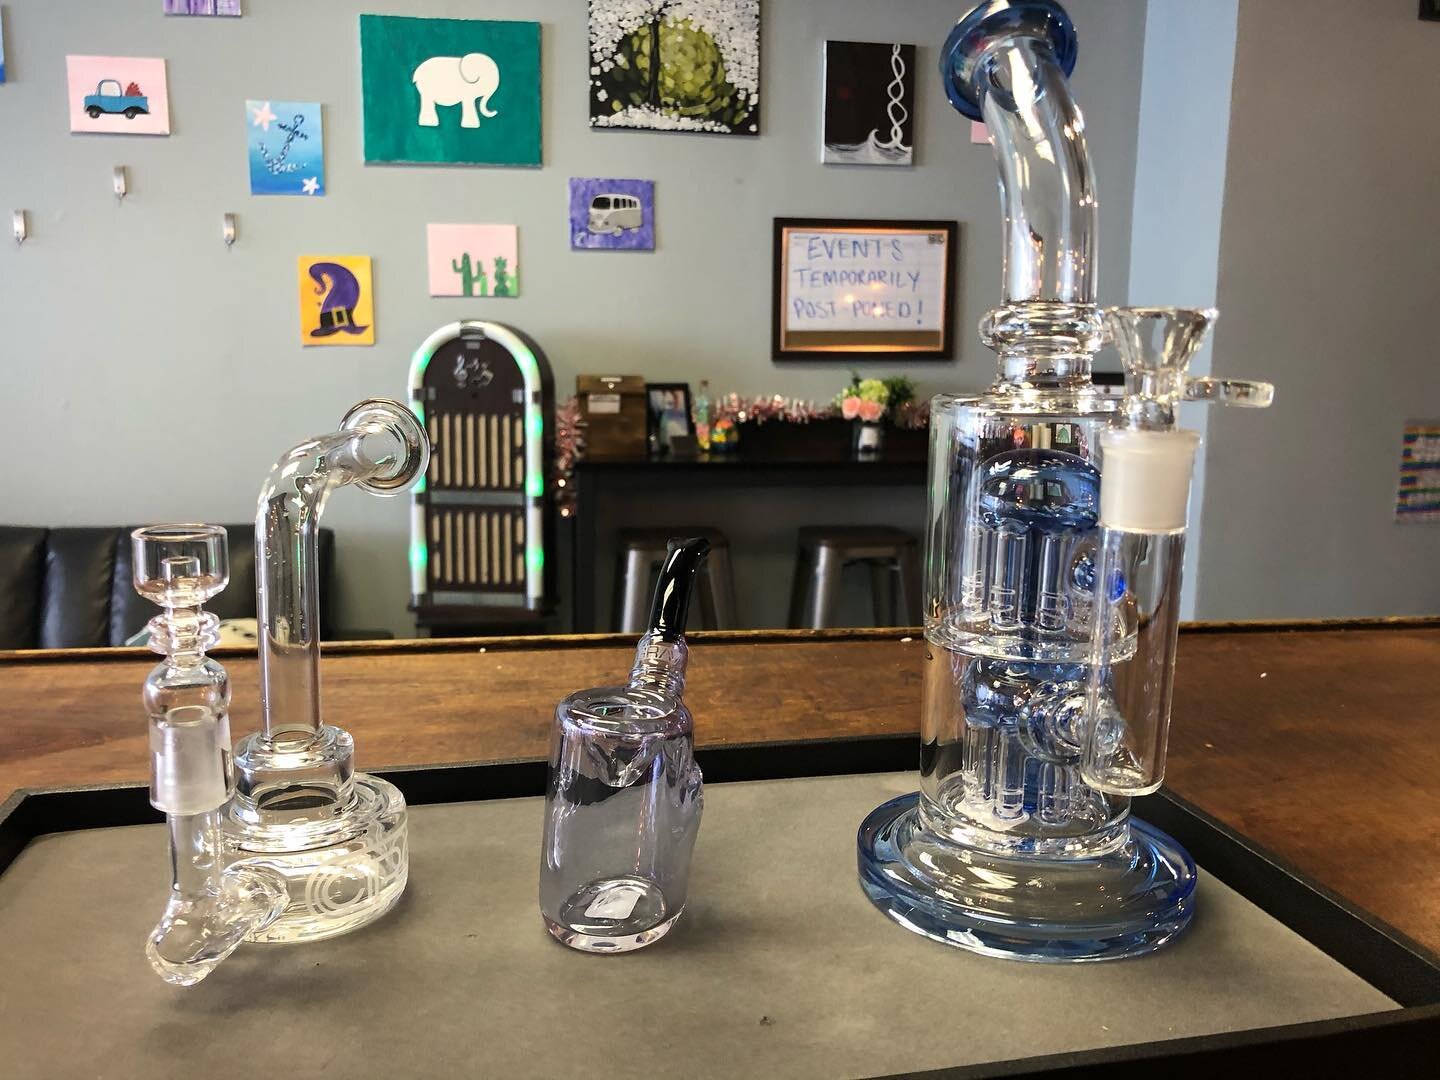 3 new beautiful pieces are now available! Dm for more information 🤗
&mdash;&mdash;&mdash;&mdash;&mdash;&mdash;&mdash;&mdash;&mdash;&mdash;&mdash;&mdash;&mdash;&mdash;&mdash;&mdash;-
#glass #glassart #gravglass #waterworks #710 #420 #smallbuisness #p